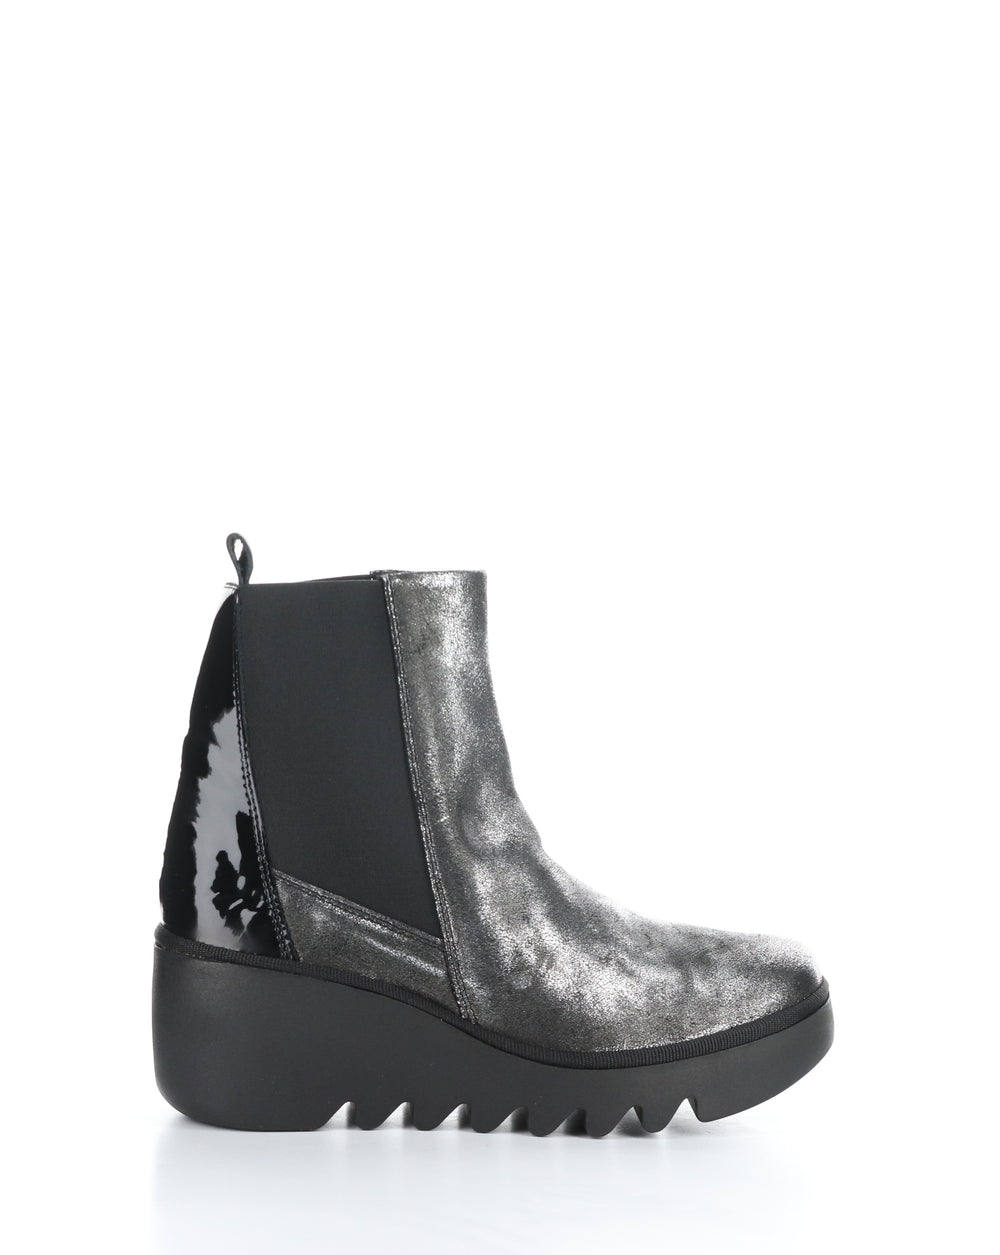 BAGU233FLY 018 SILVER/BLACK Elasticated Boots